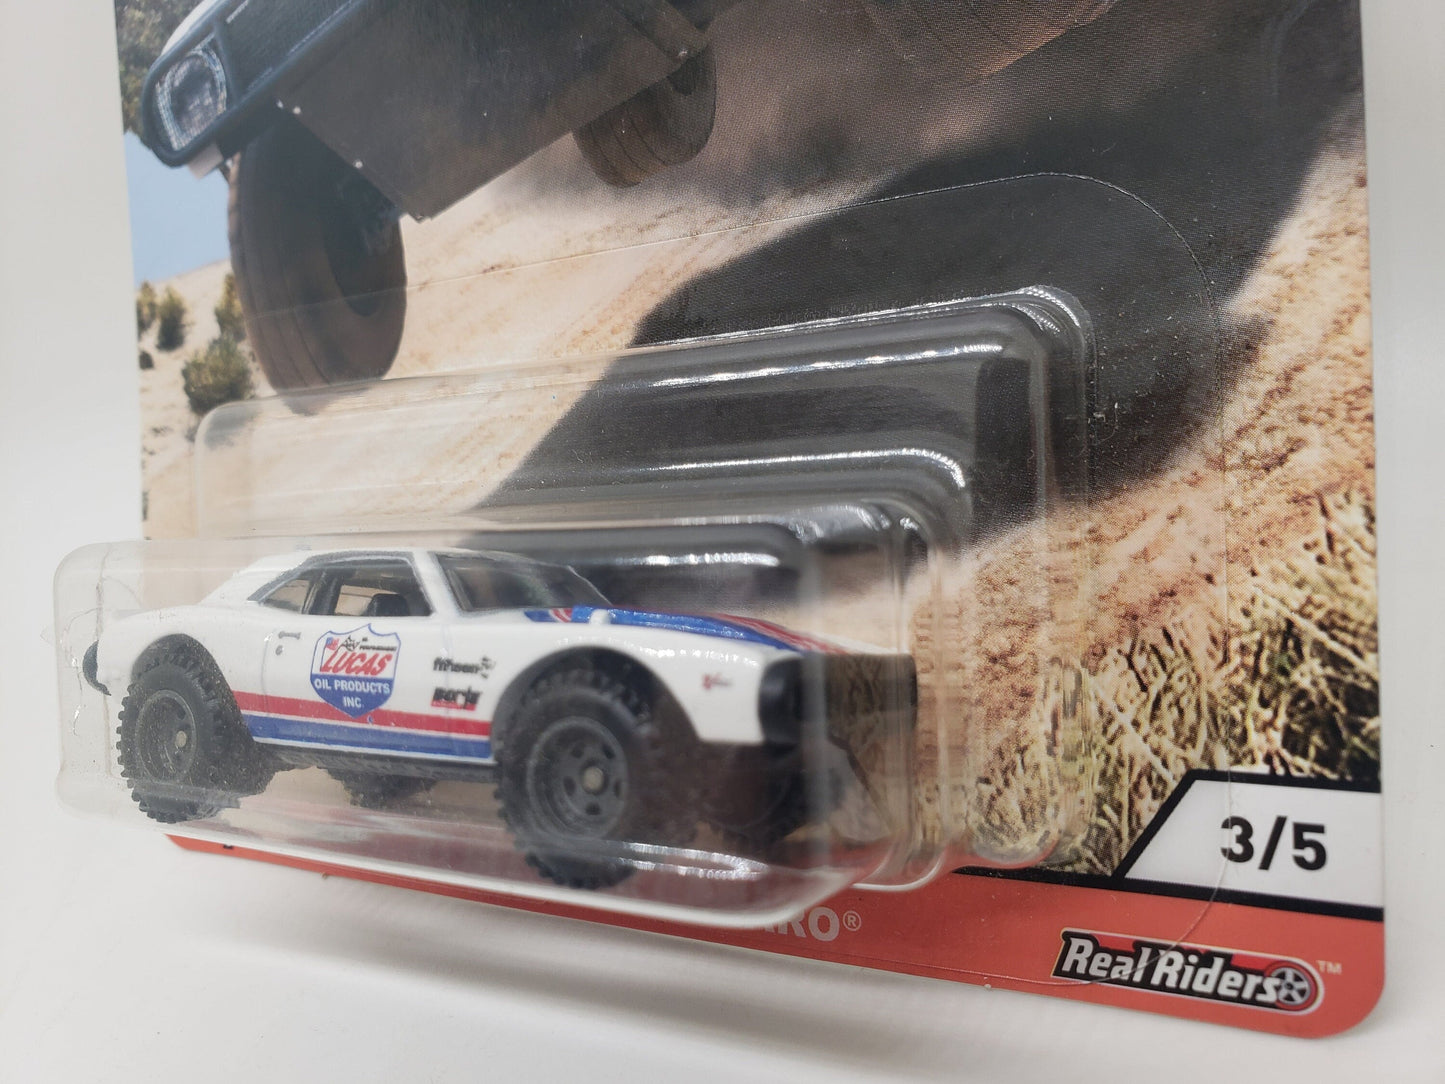 Hot Wheels '67 Off Road Camaro White Car Culture Miniature Collectable Scale Model Toy Car